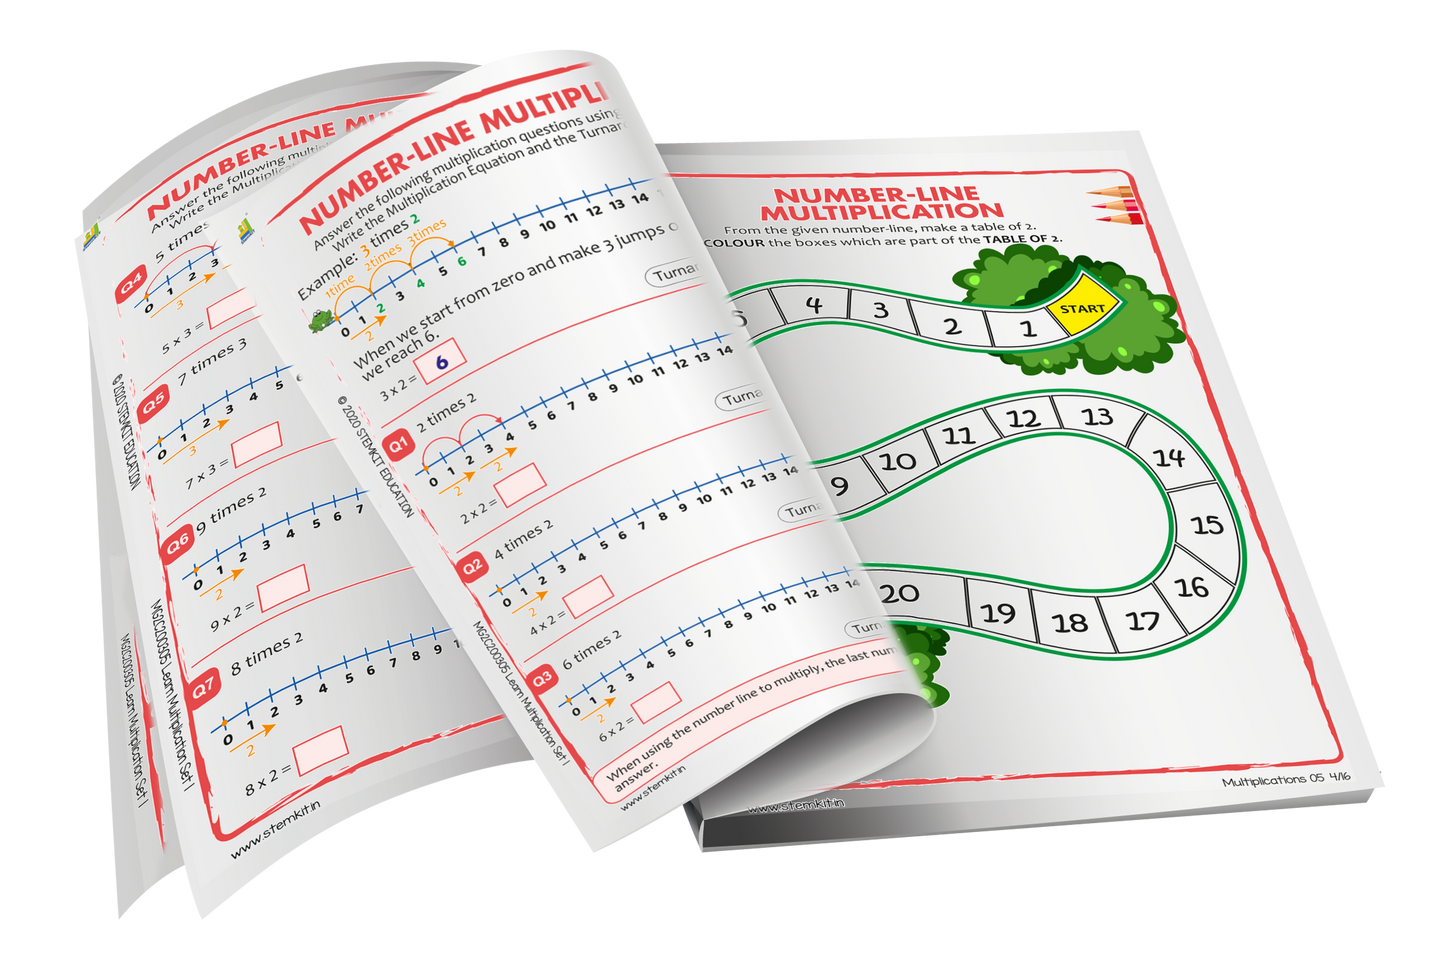 Stemkit Learn Multiplication with mental practies for beginners |10 Workbooks for 4-5+ Year Olds - Activity Oriented